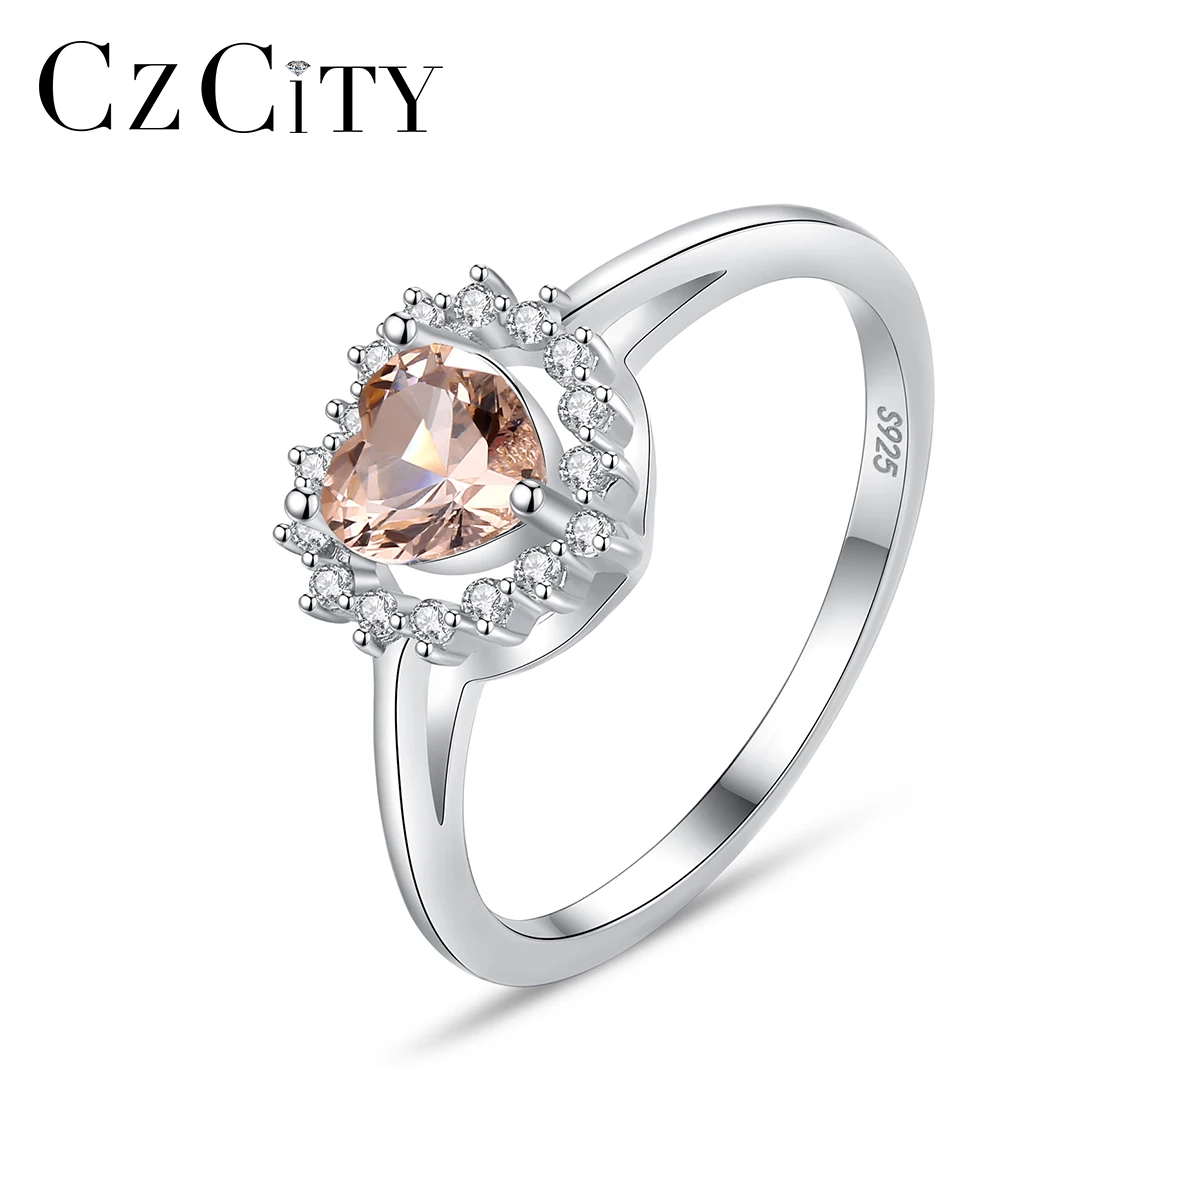 

CZCITY Crystal Heart Shape S925 Sterling Silver Ring Pink Charm Gemstone Women Jewelry Rings